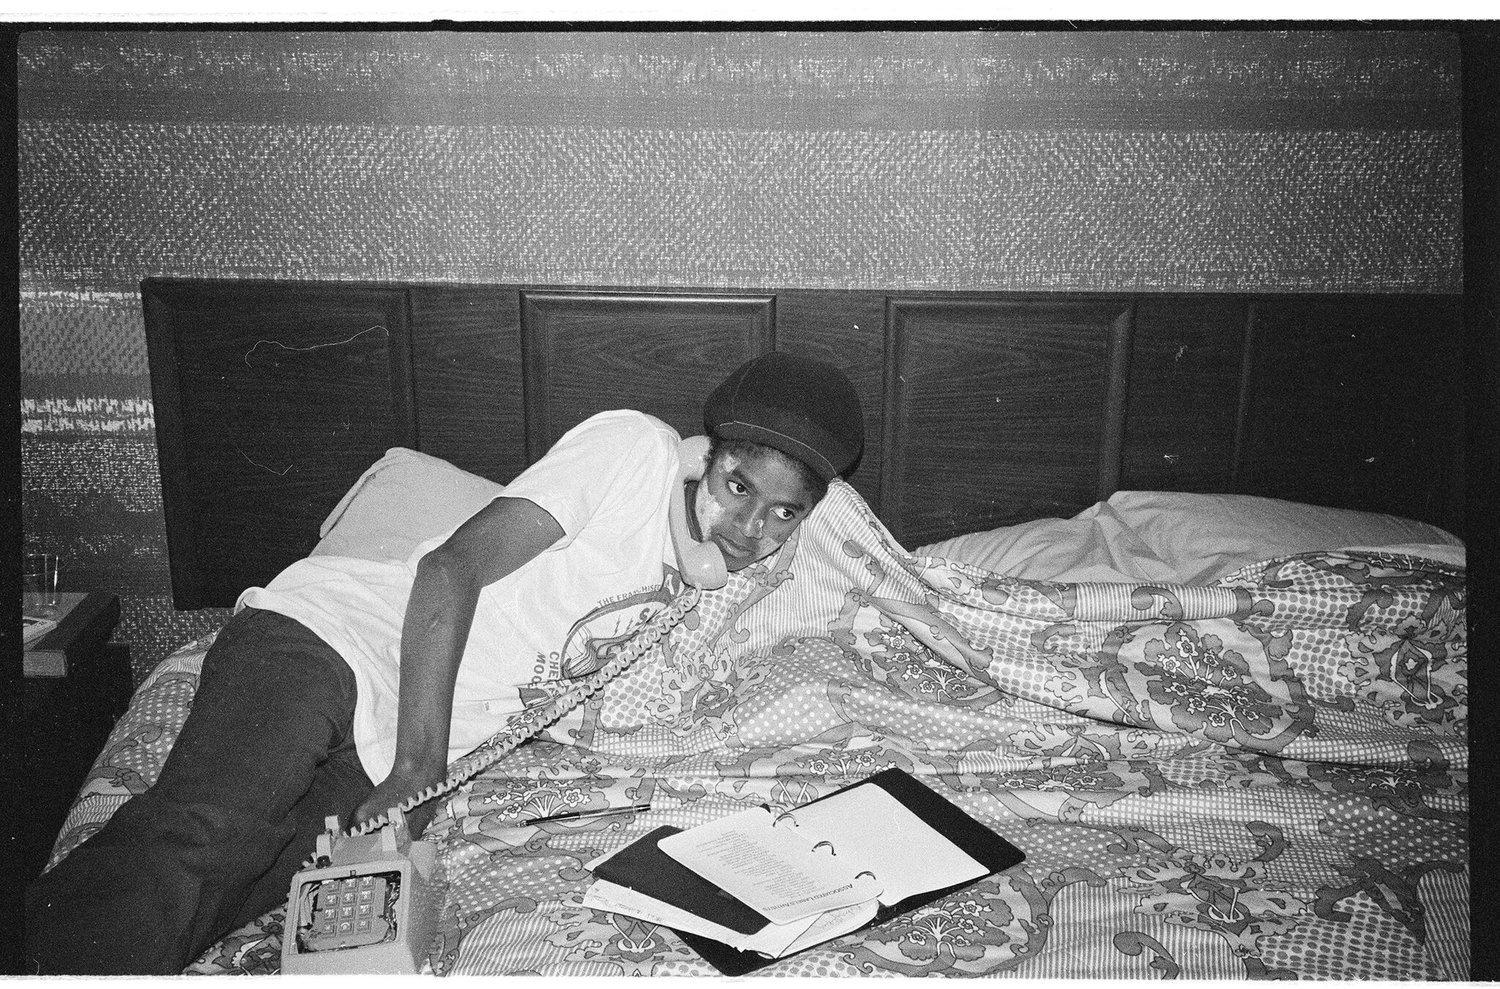 David Nutter Black and White Photograph – Michael Jackson XII